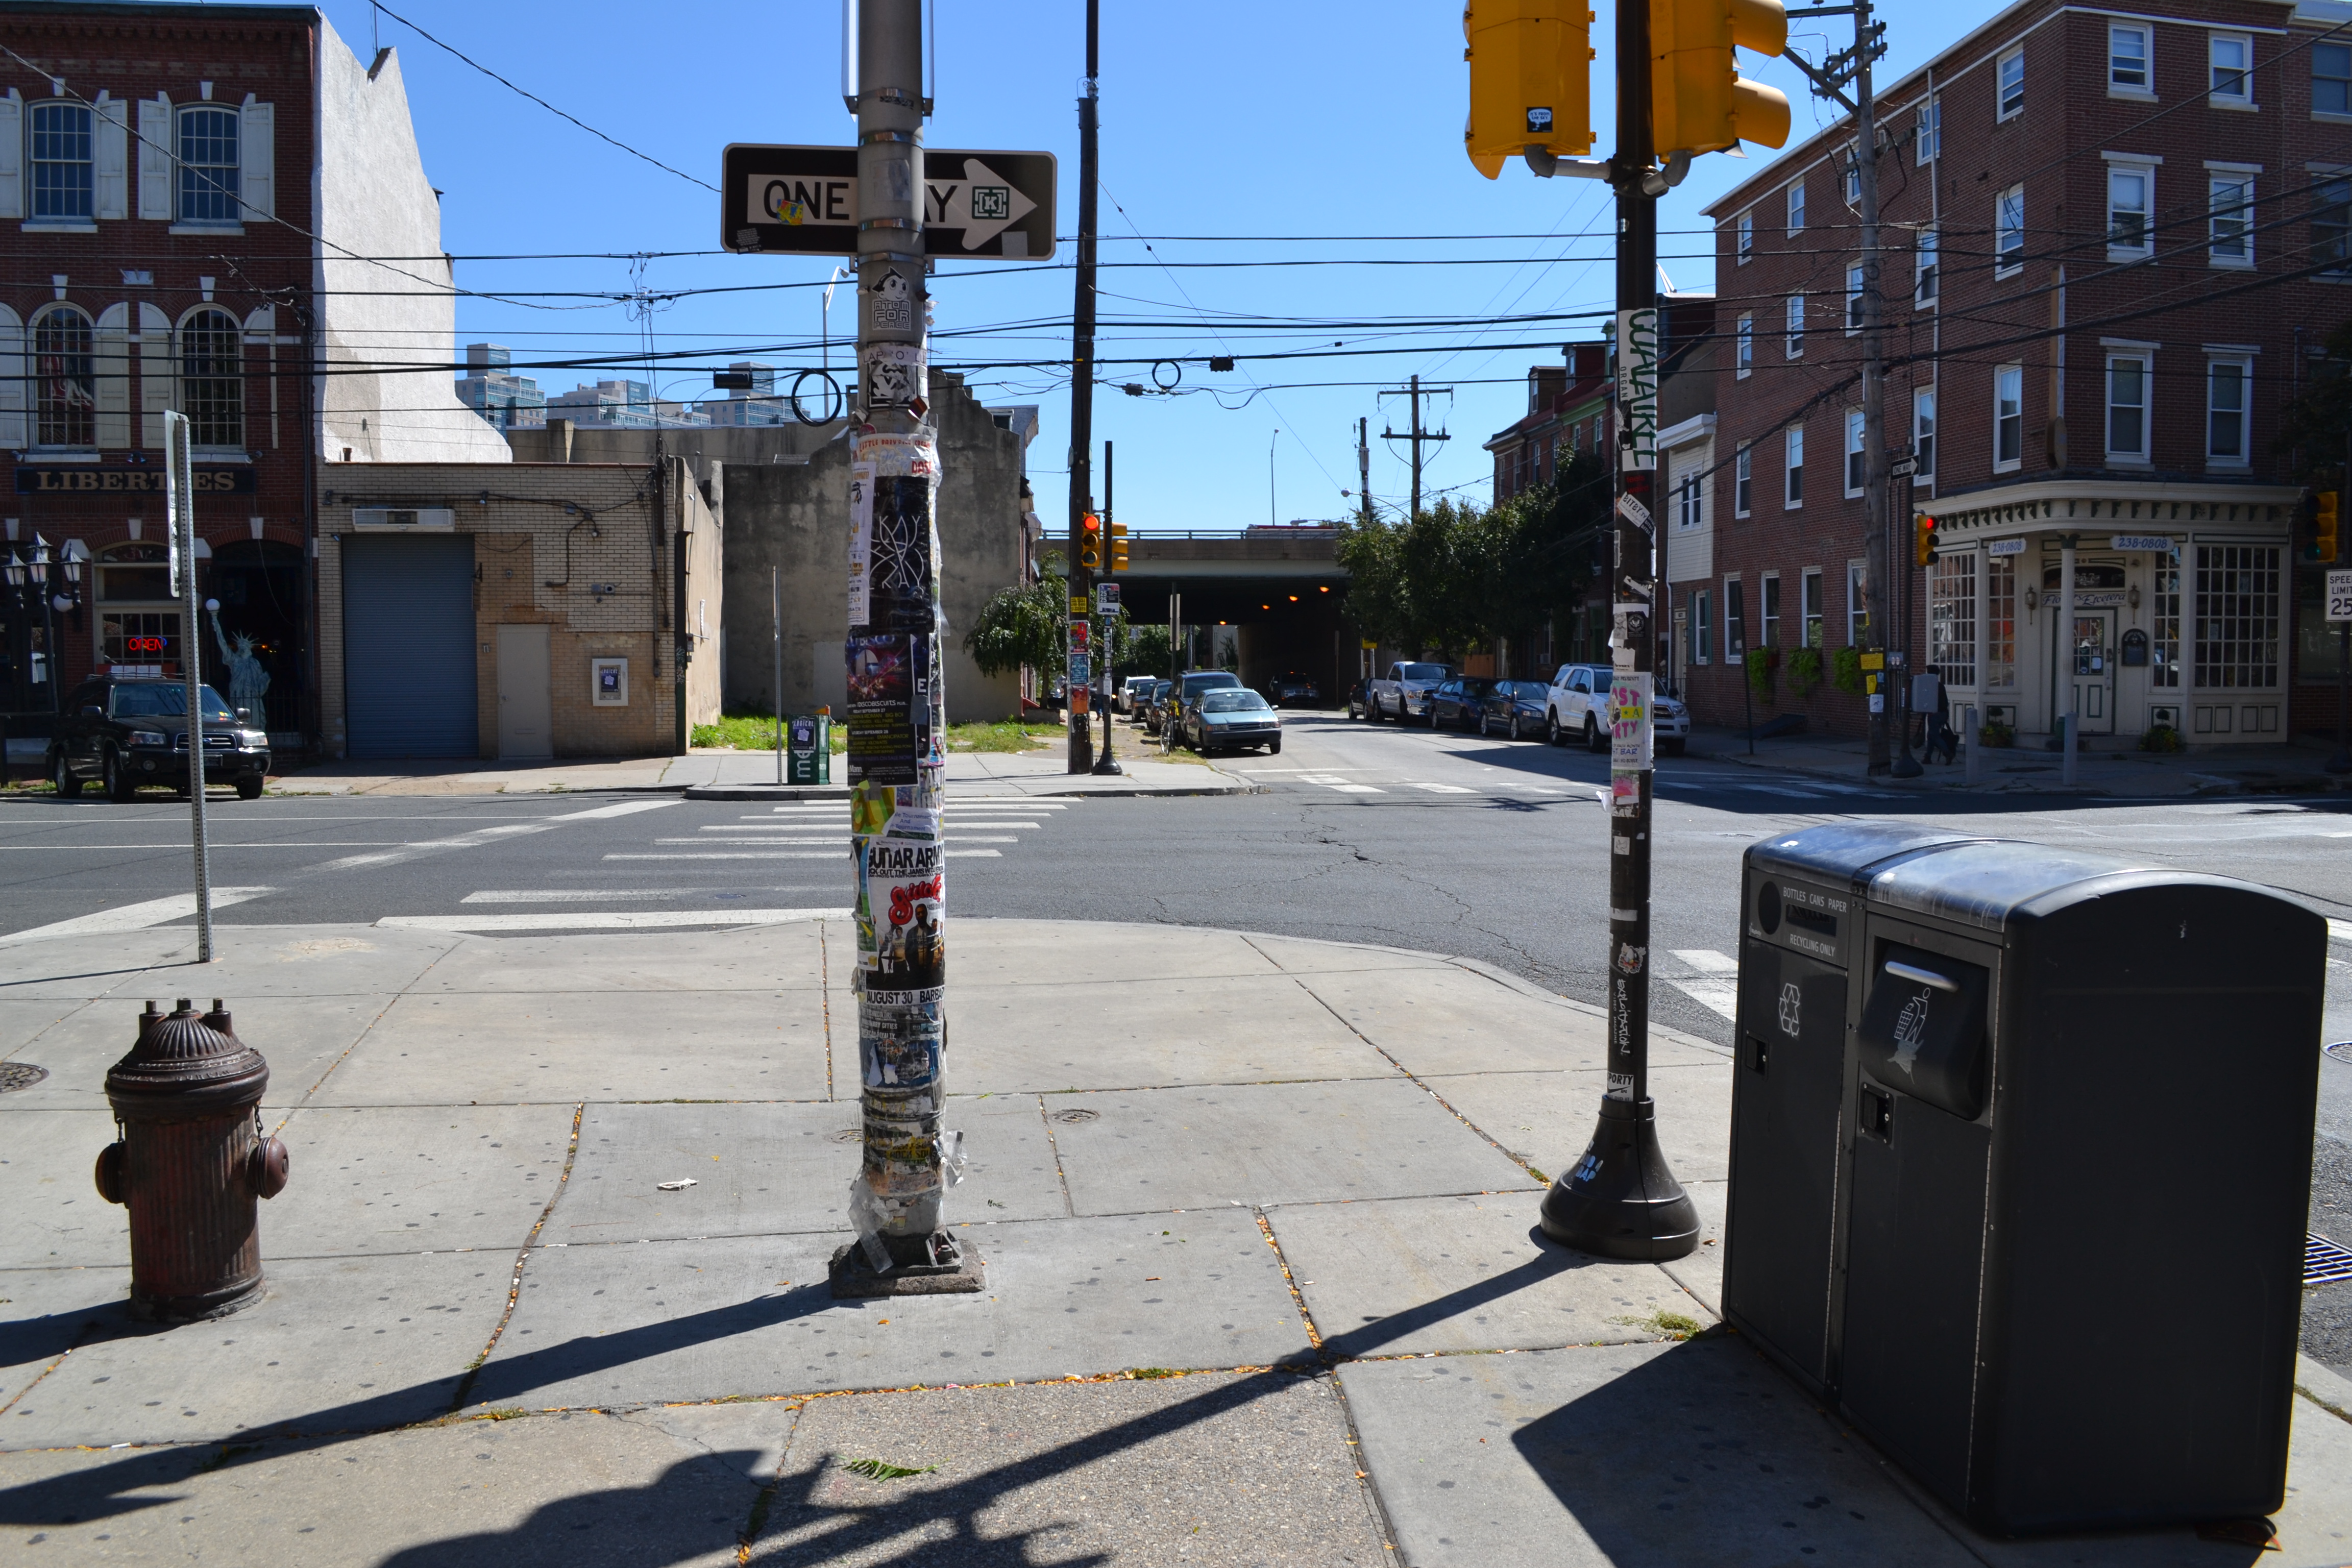 As Northern Liberties becomes more of a destination neighborhood, there is more emphasis on reducing litter